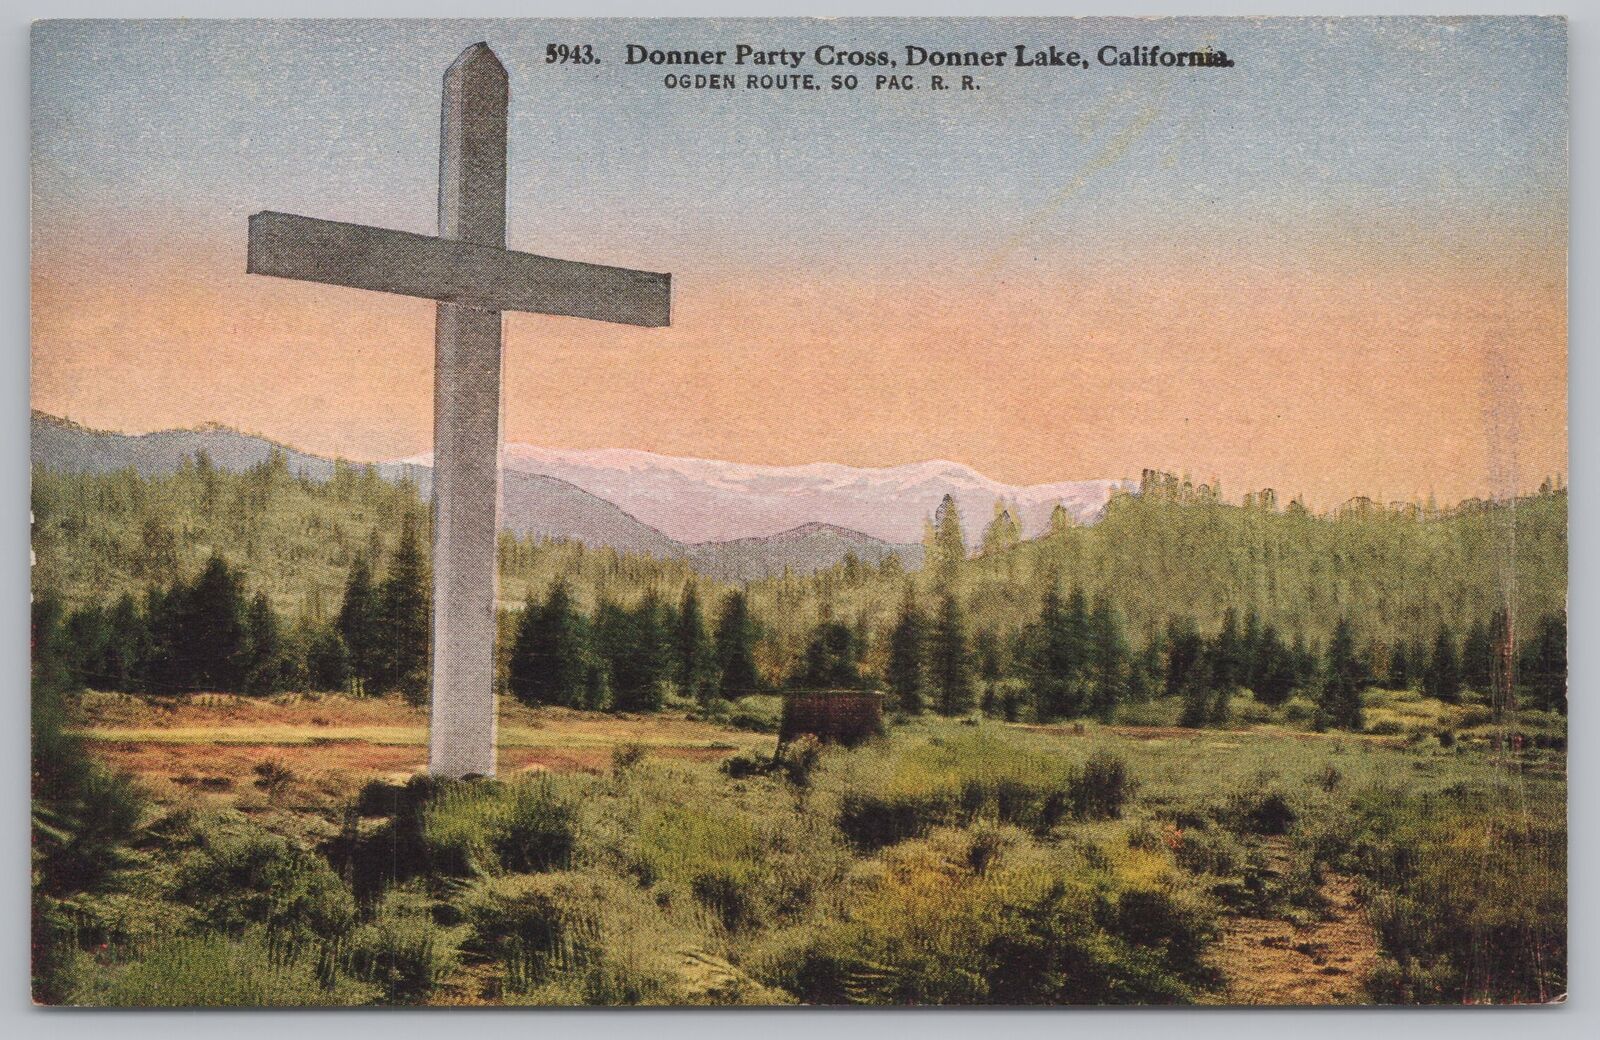 State View~Donner Party Cross~Donner Lake CA~Ogden Route So Pac RR~Vintage PC